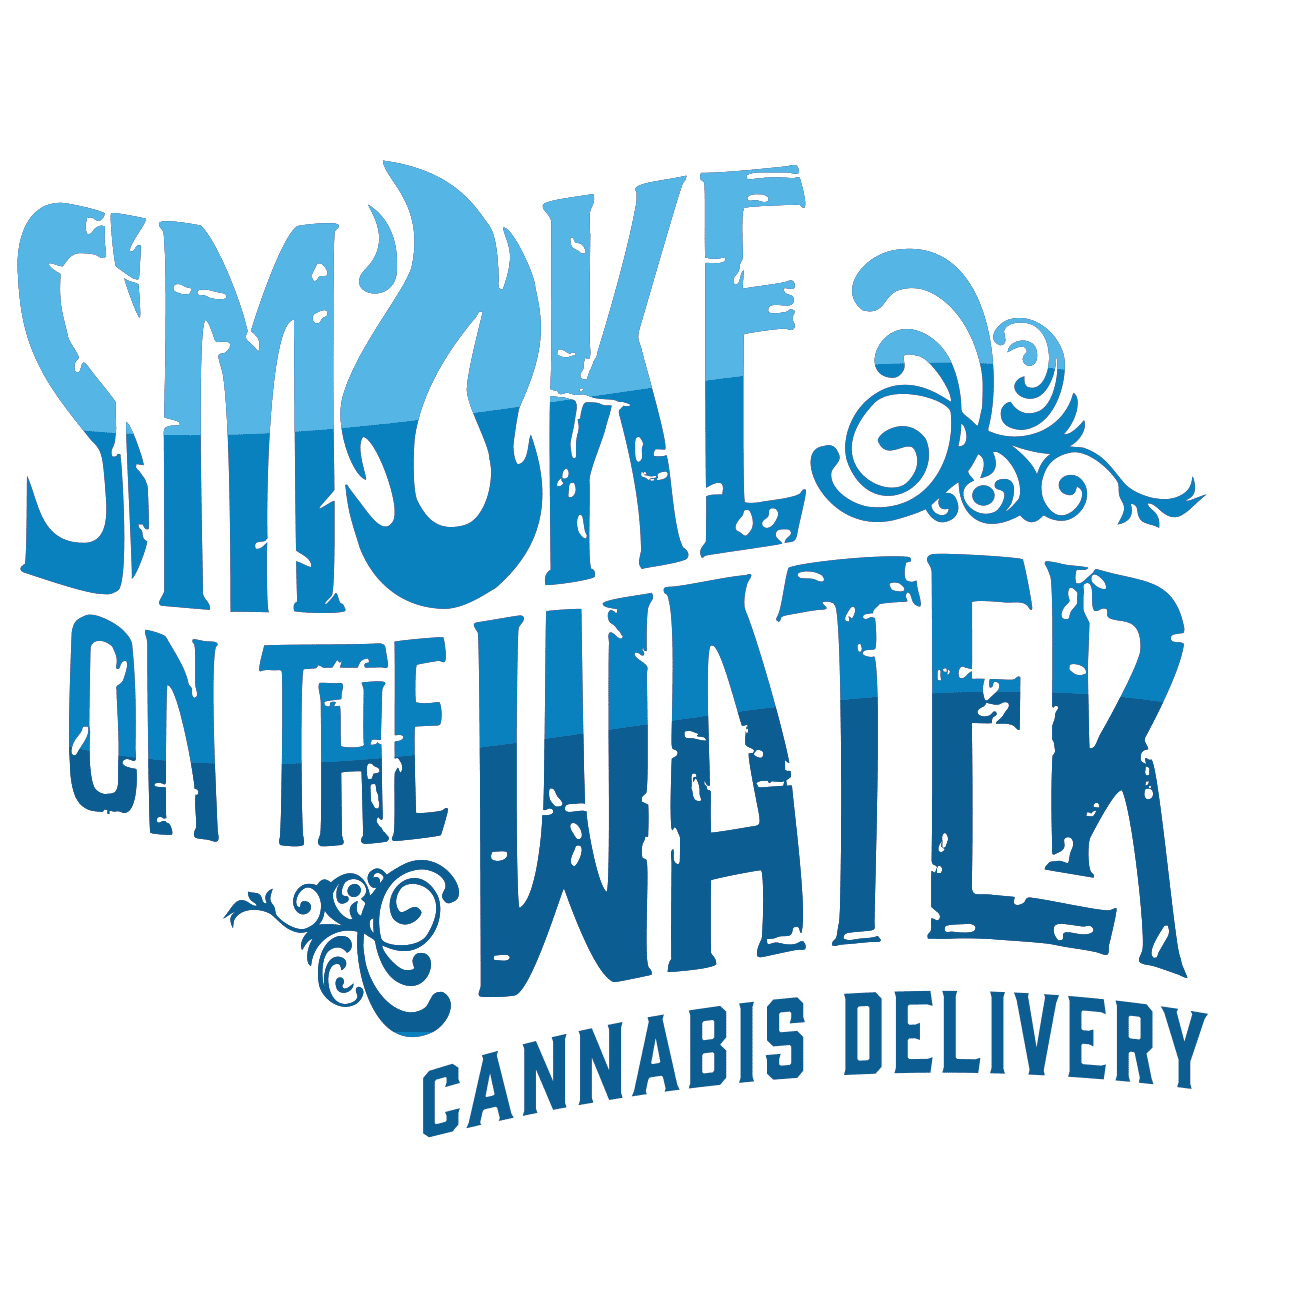 SOTW cannabis delivery